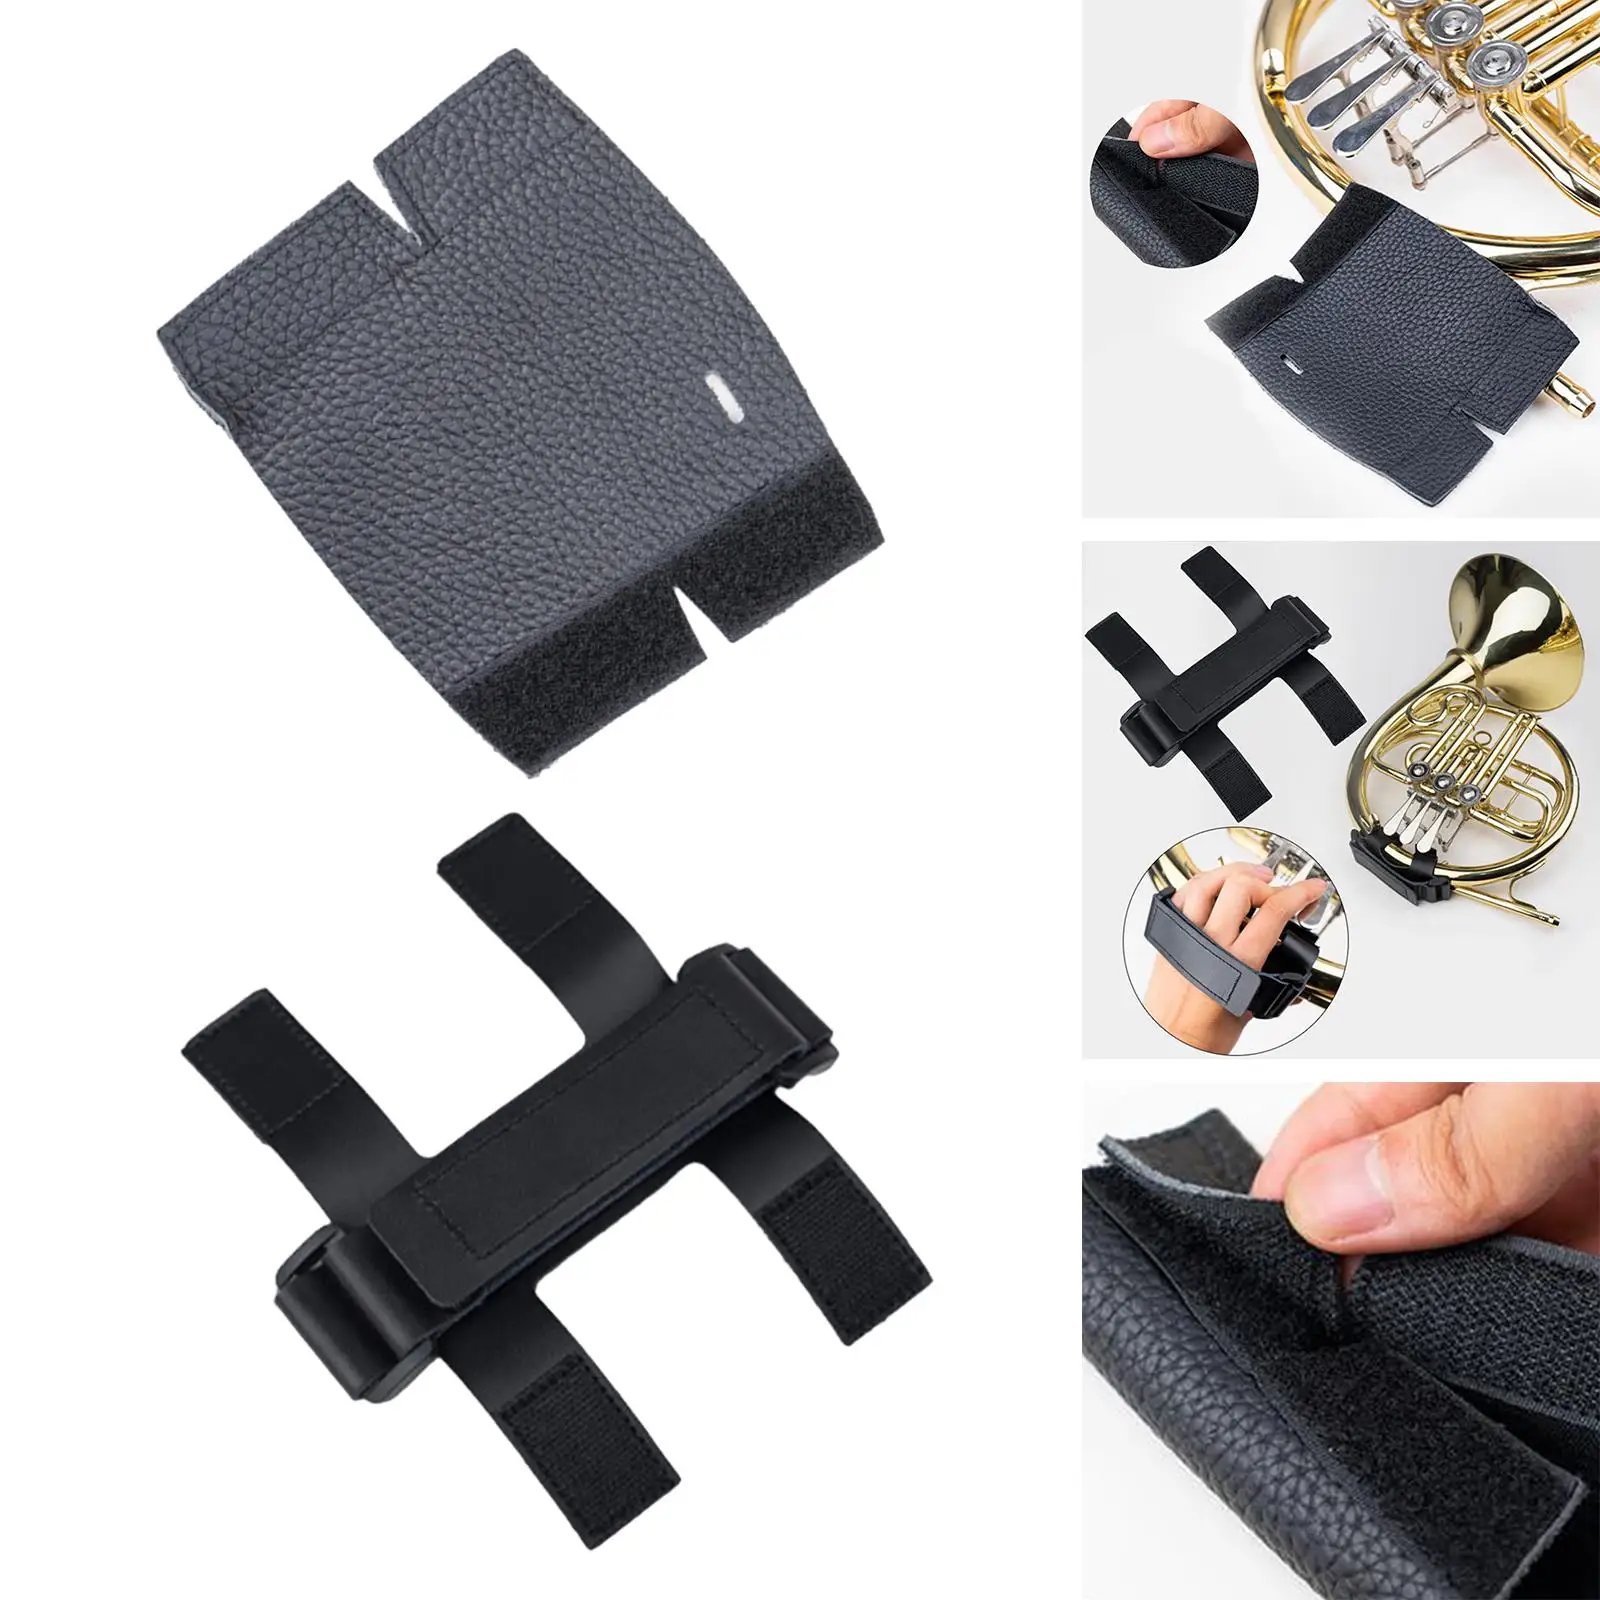 French Horn Hand Guard Brass Instrument Accessory Protective Cover PU Leather Wrap Cover for Exercise Practice Performance Stage